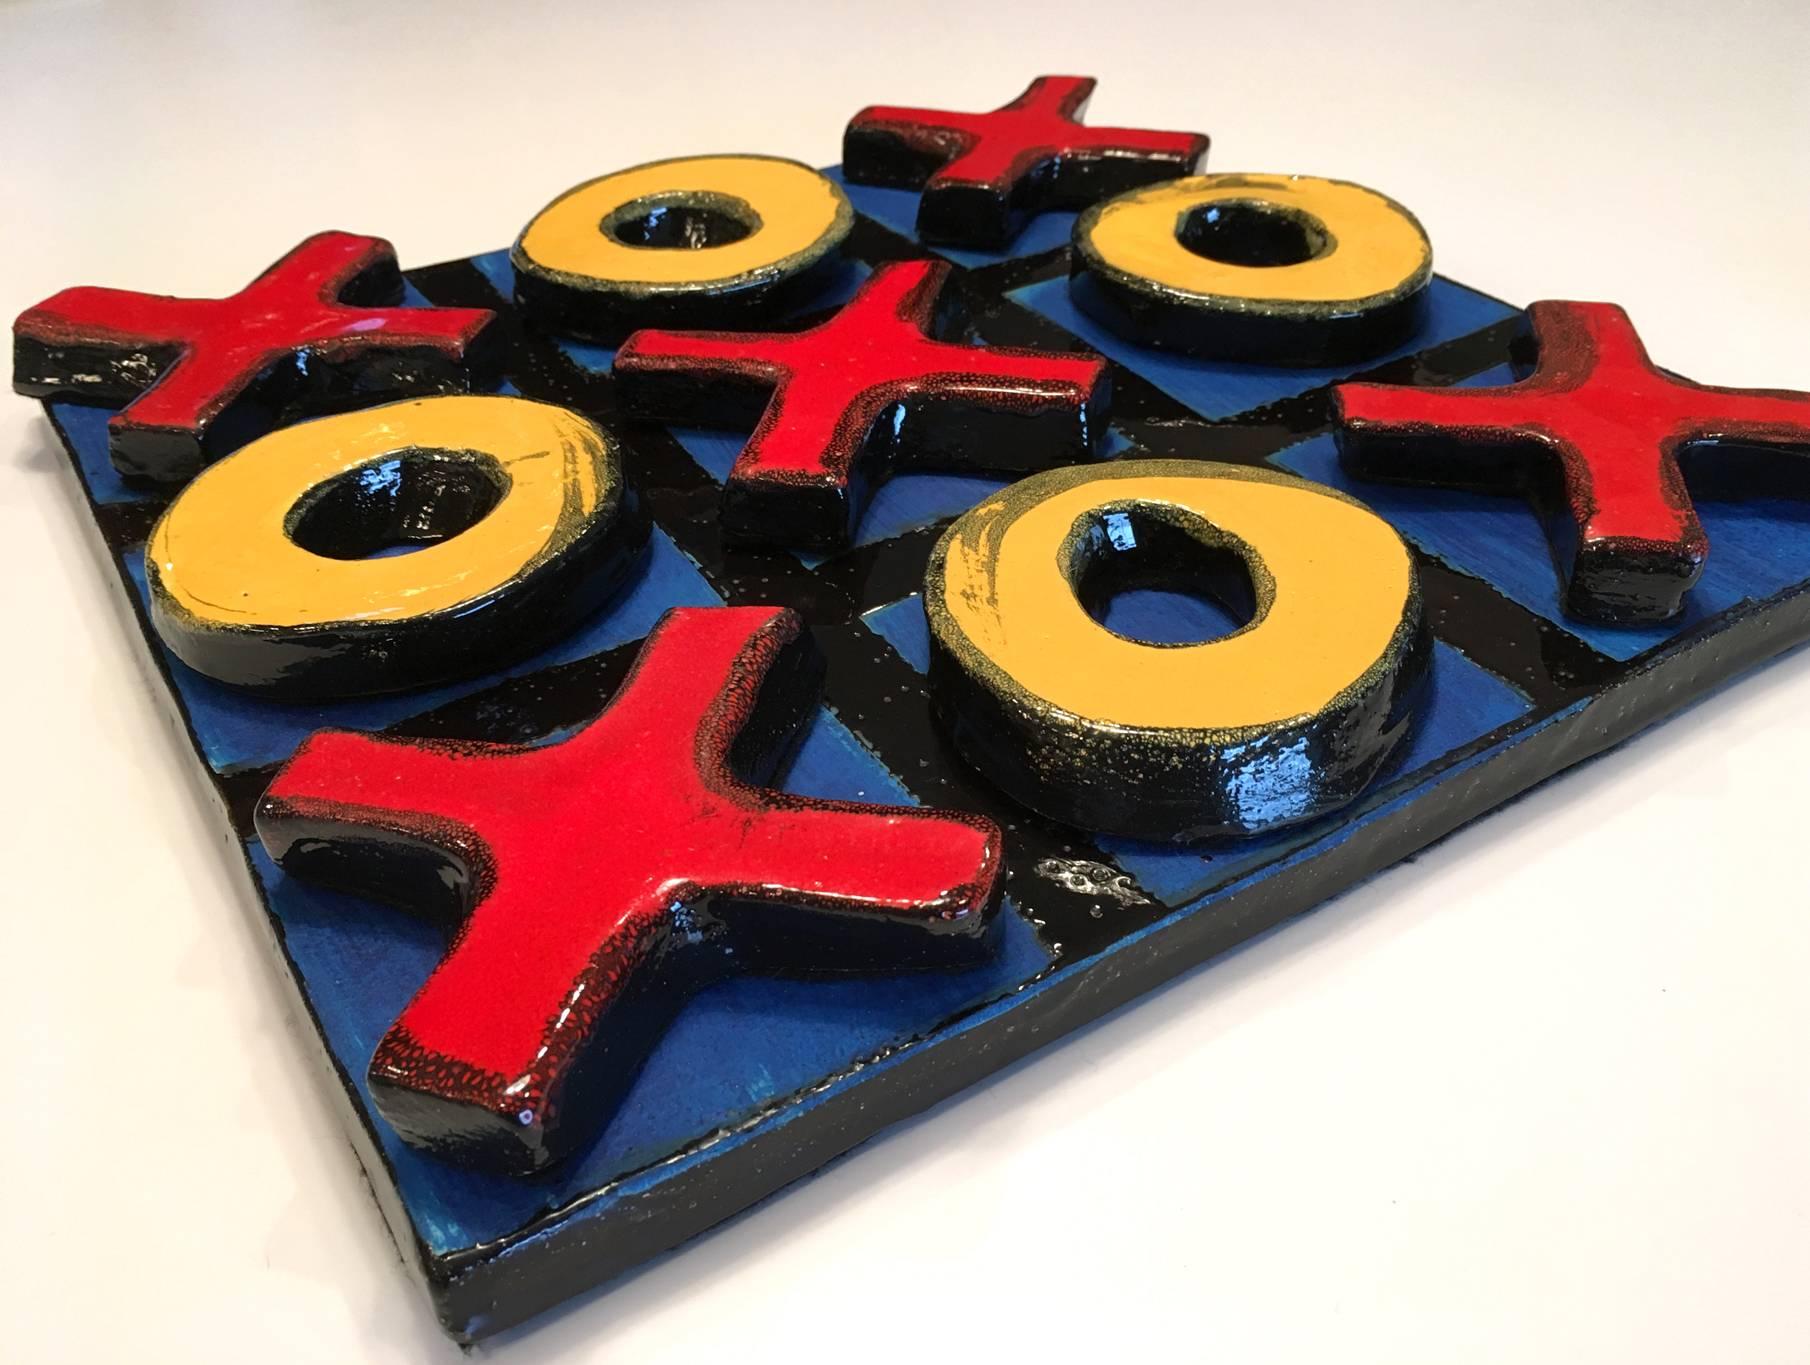 American school glazed ceramic sculpture of a tic tack toe, 20th century, unsigned. Five X's and five O's lined with felt bases, rest loosely on a square base, all glazed and fired ceramic.